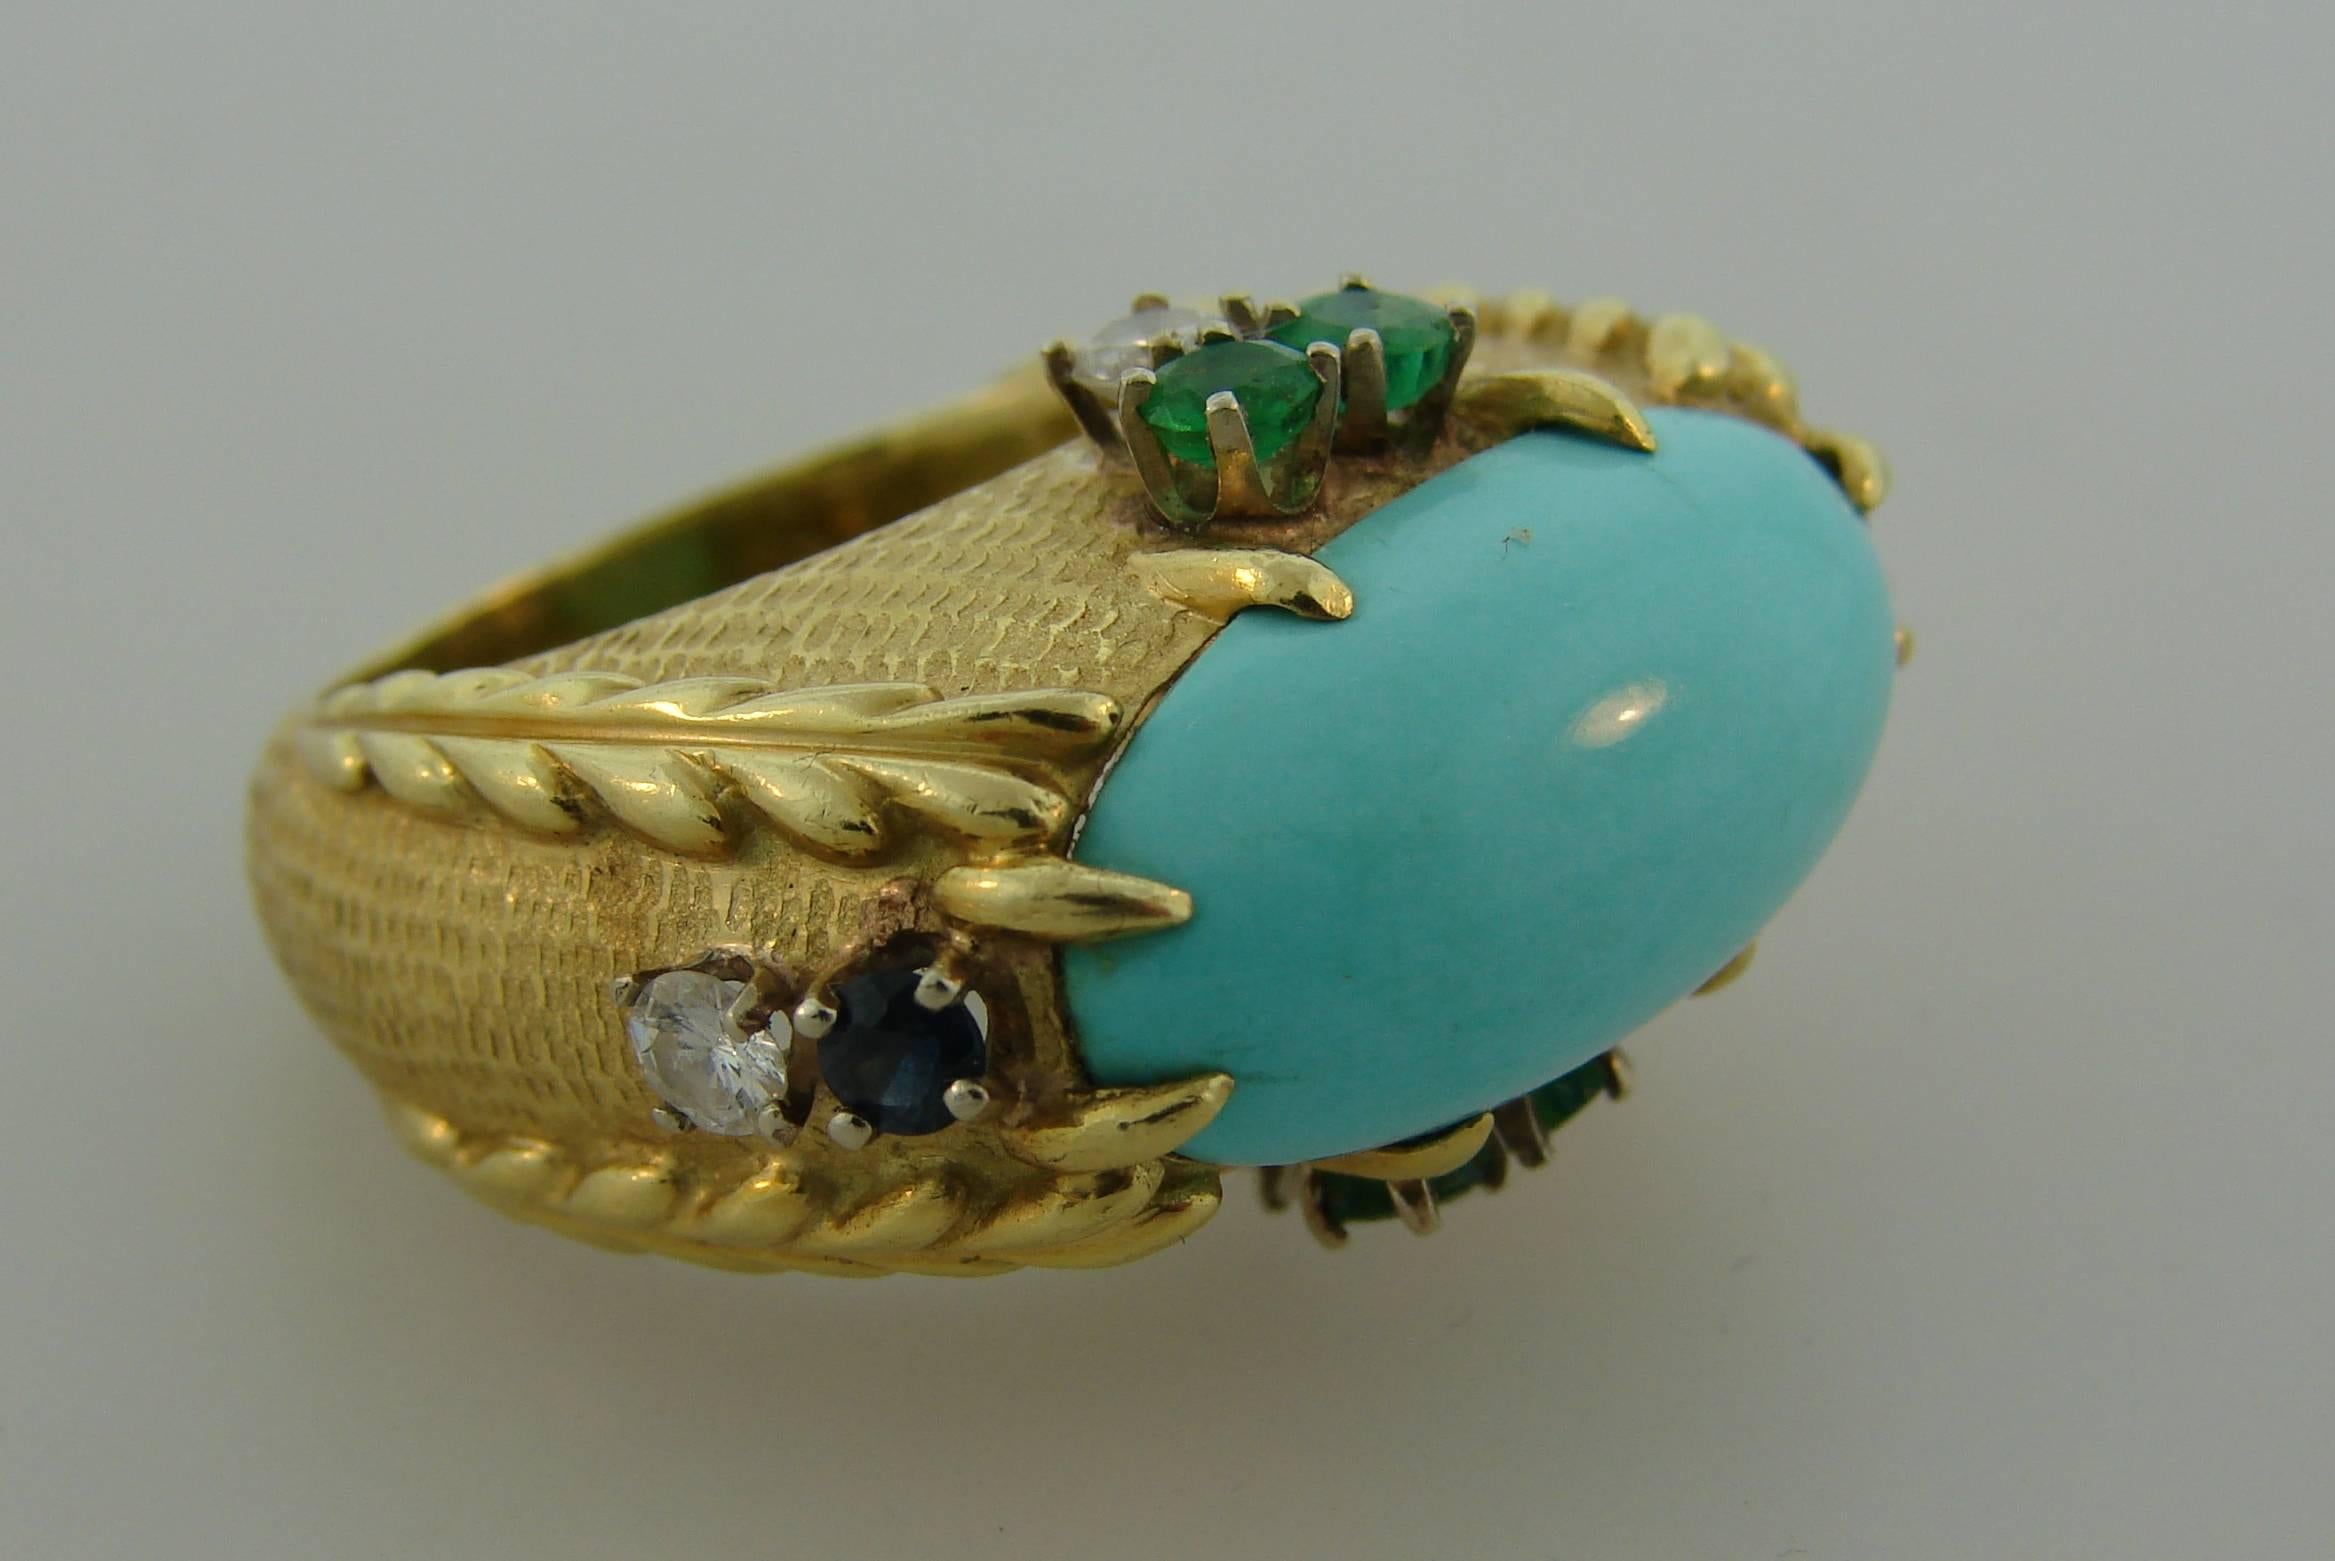 Stunning cocktail ring created by Cartier in New York in the 1970's. It features a beautiful oval-shaped Persian turquoise set in 18 karat yellow gold and accented with round brilliant cut diamonds, round faceted emeralds and sapphires. Unusual